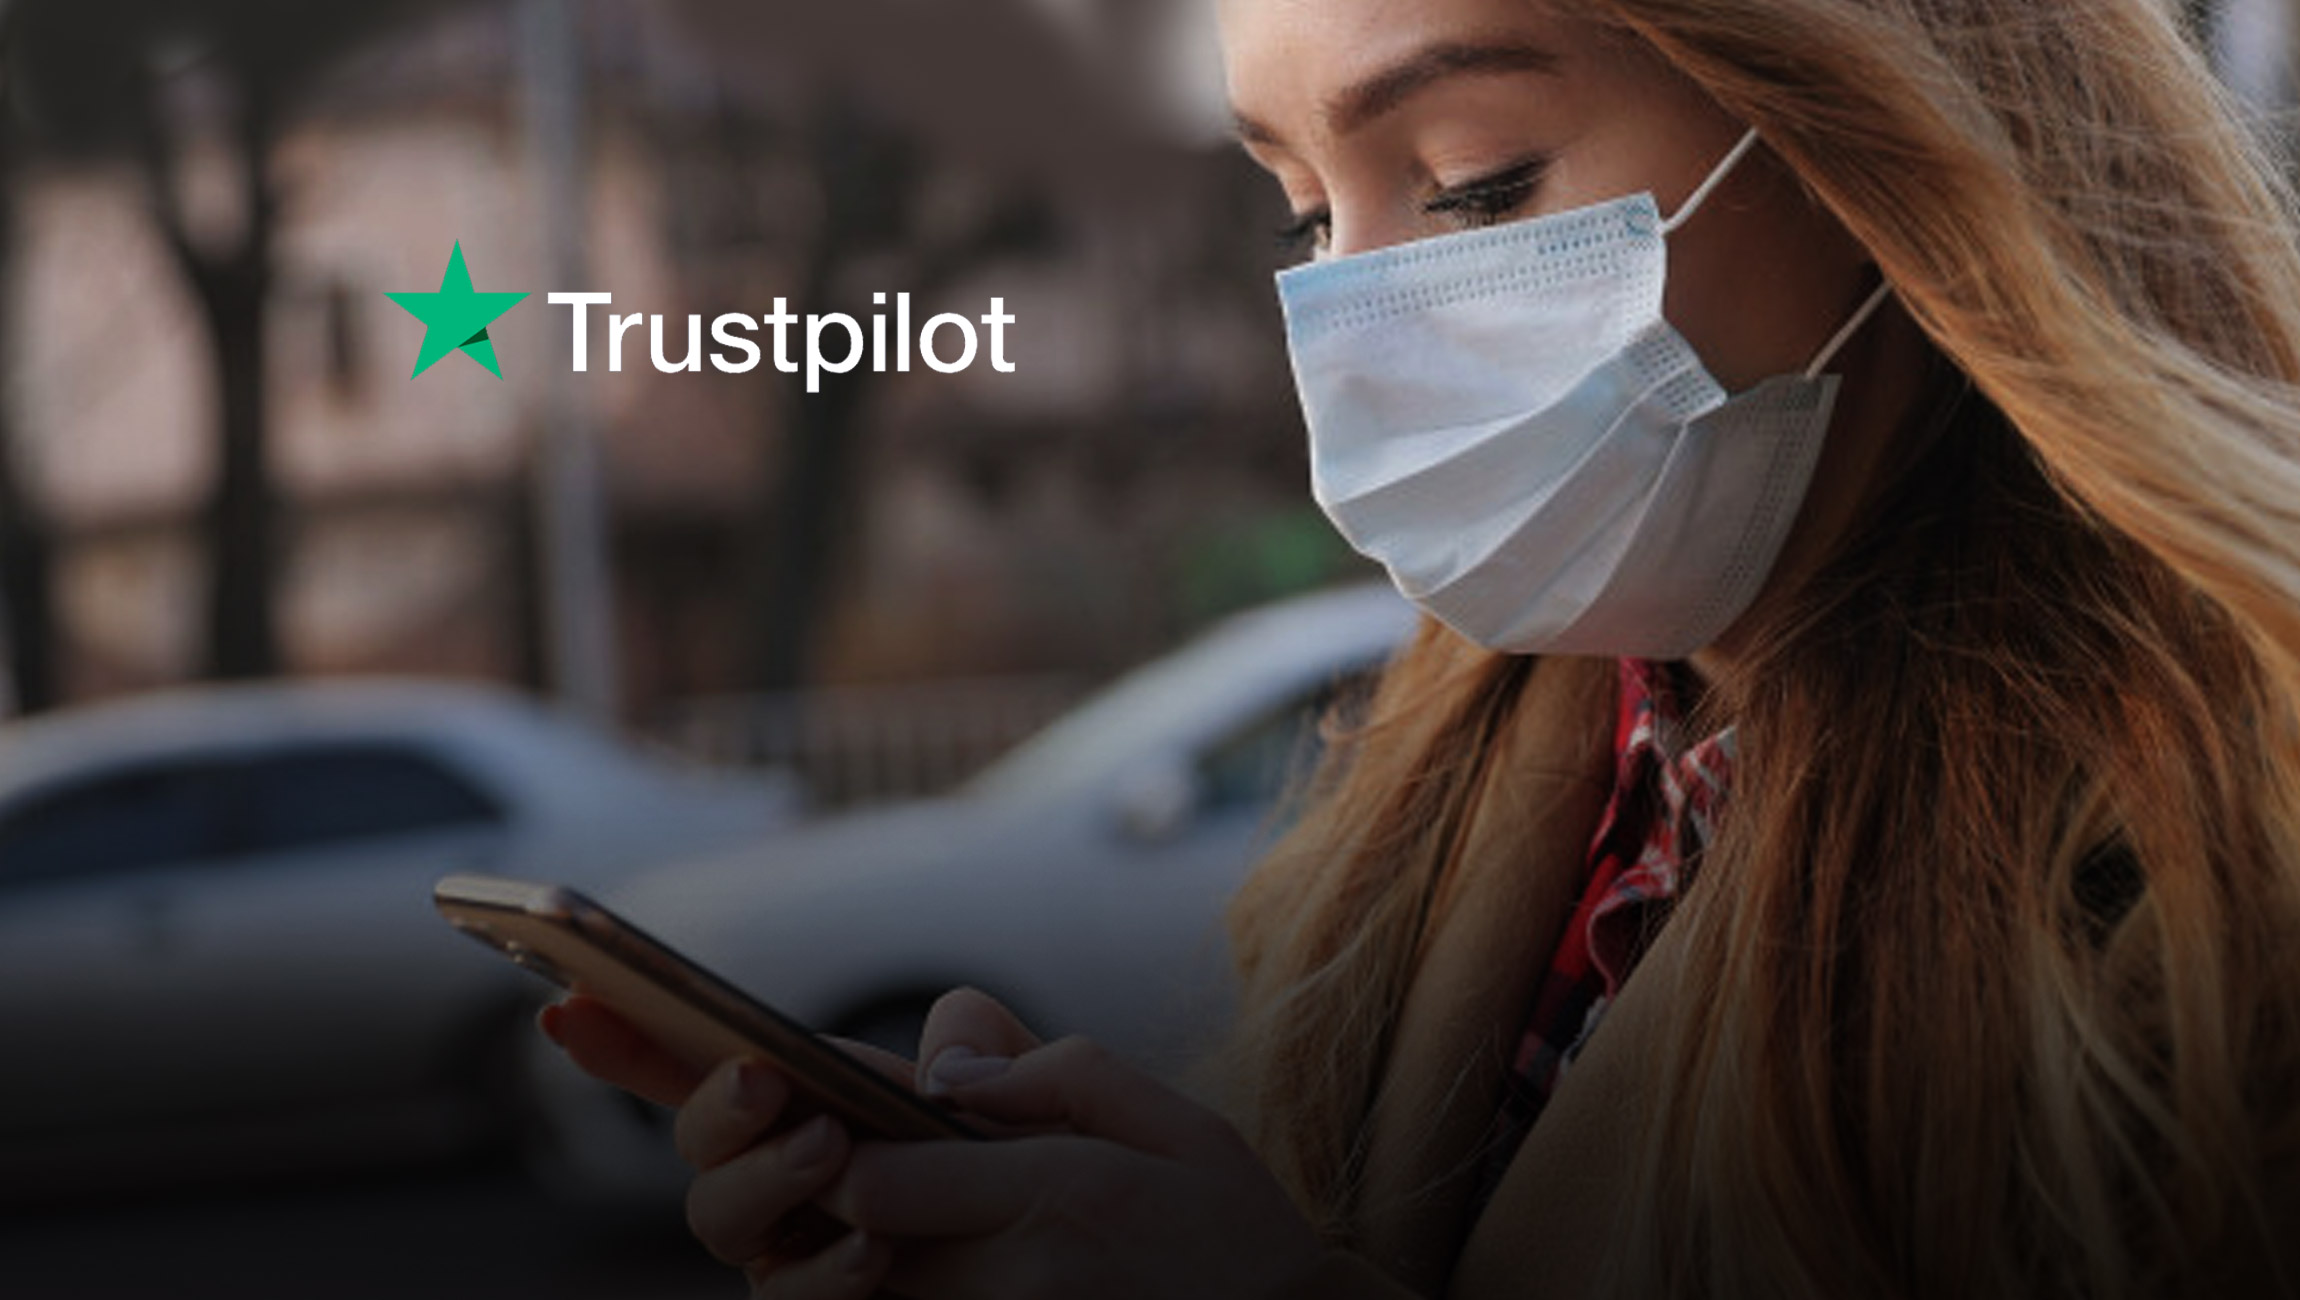 Trustpilot warns consumers about potential online exploitation following the Coronavirus outbreak